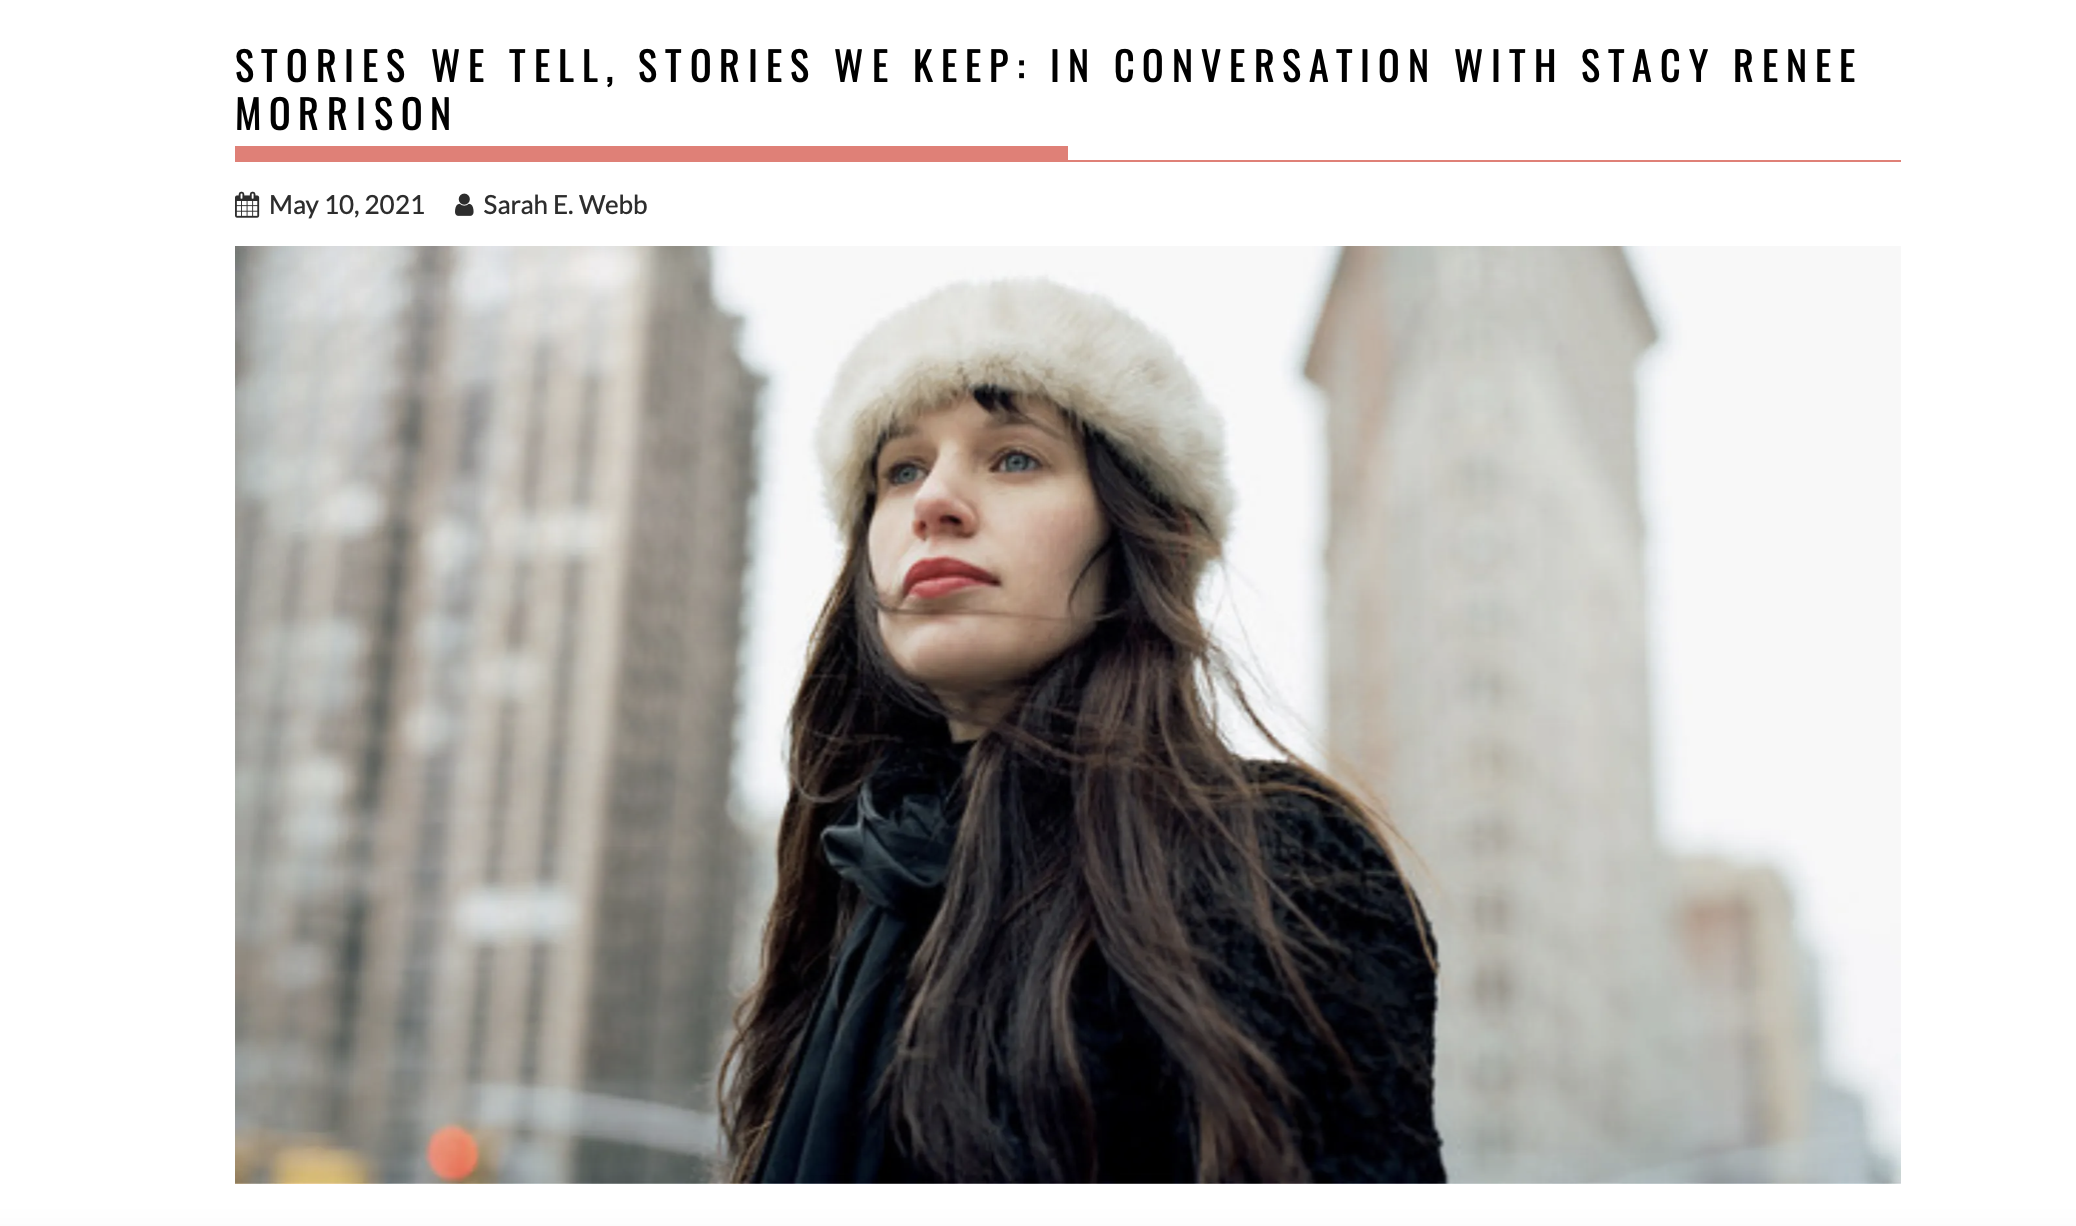 Thumbnail of Stories We Tell, Stories We Keep: In Conversation With Stacy Renee Morrison